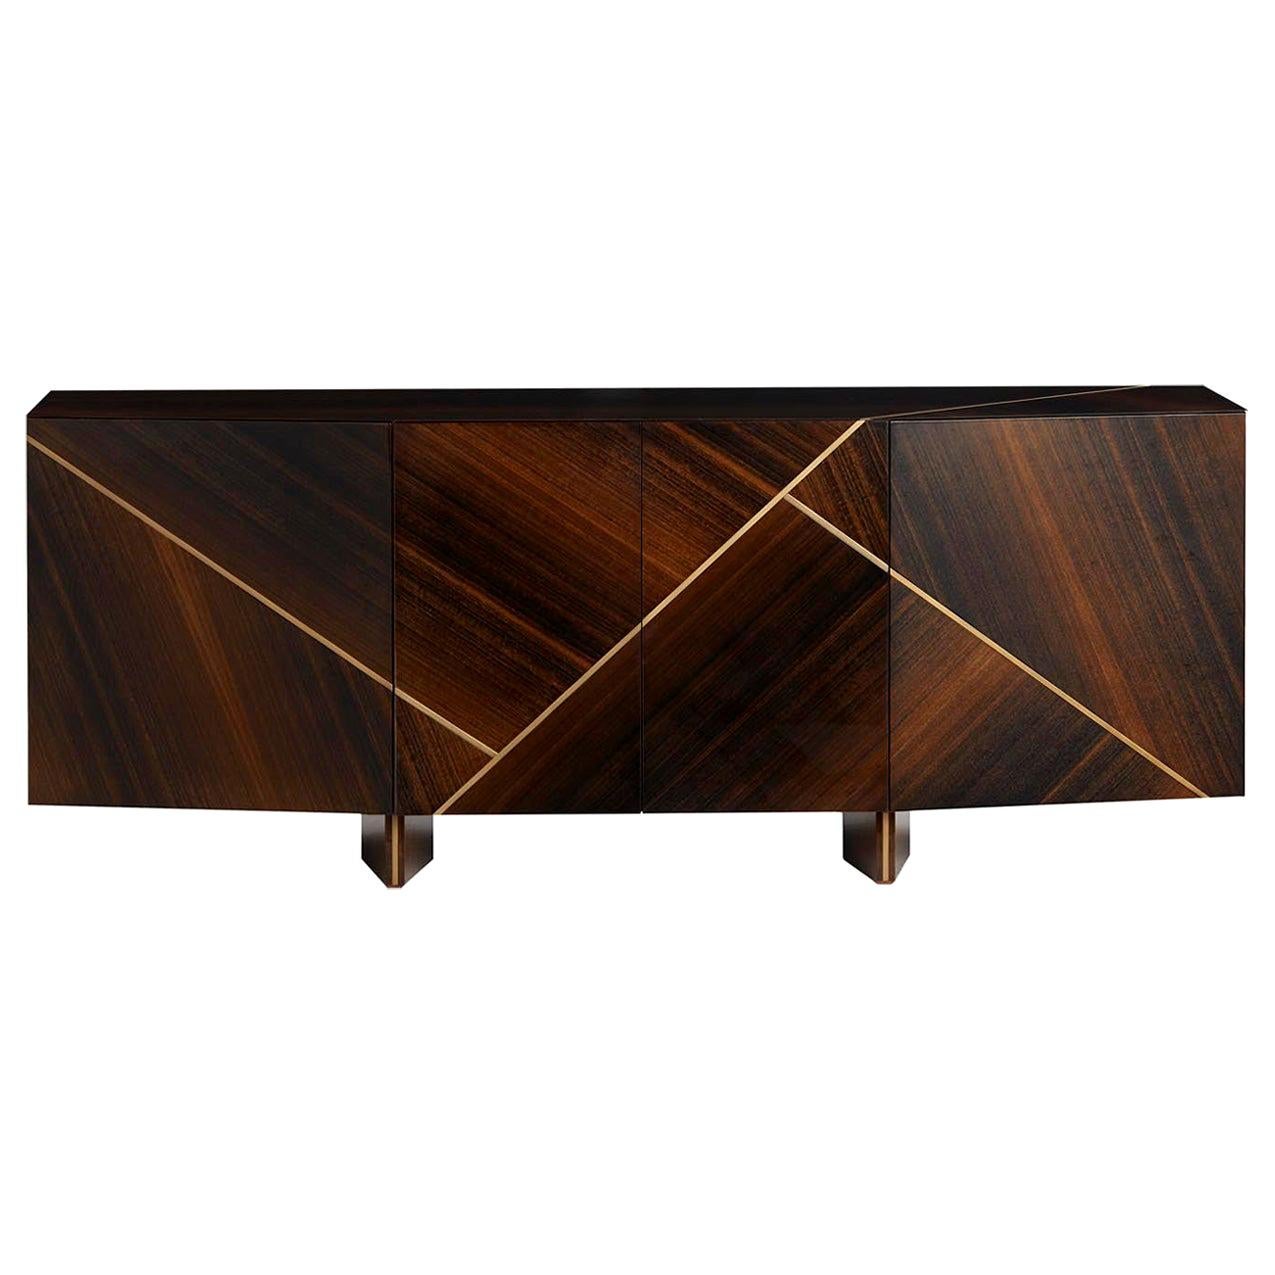 LORCA Sideboard in Eucalyptus Fumé and Antique Brass Color 